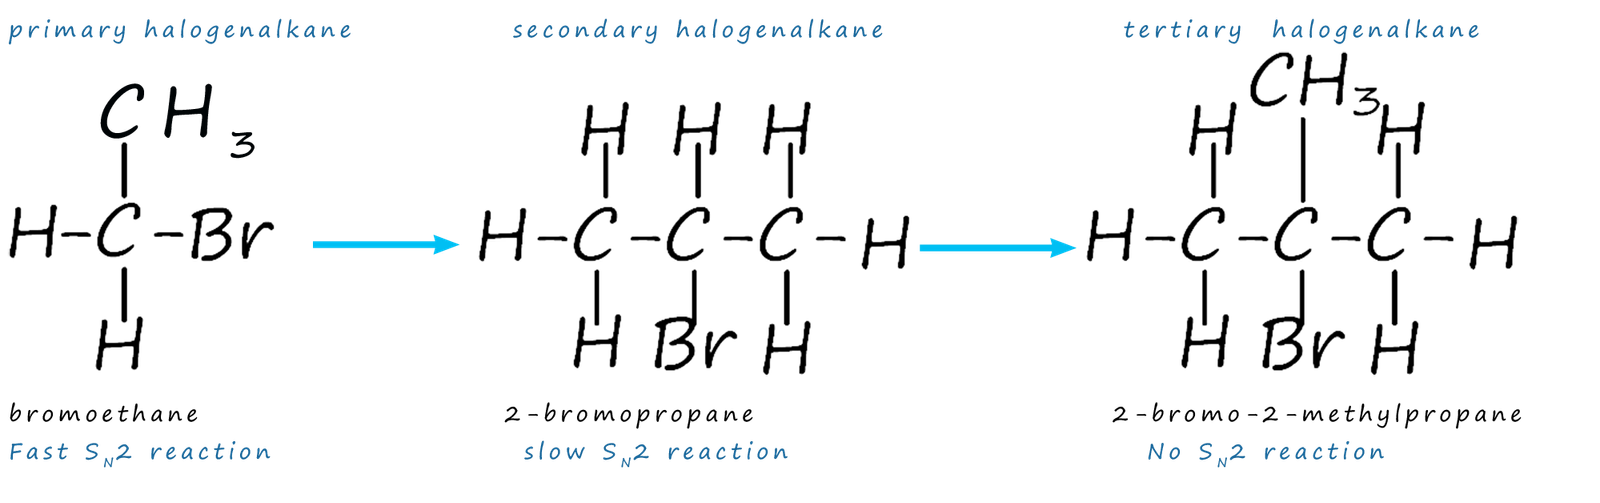 Explanantion as to why primary halogenalkanes react by SN2 mechanism and why secondary halogenalkanes react slowly by a SN2 mechanism but tertiary halogenalkanes do not react by an SN2 mechanism.